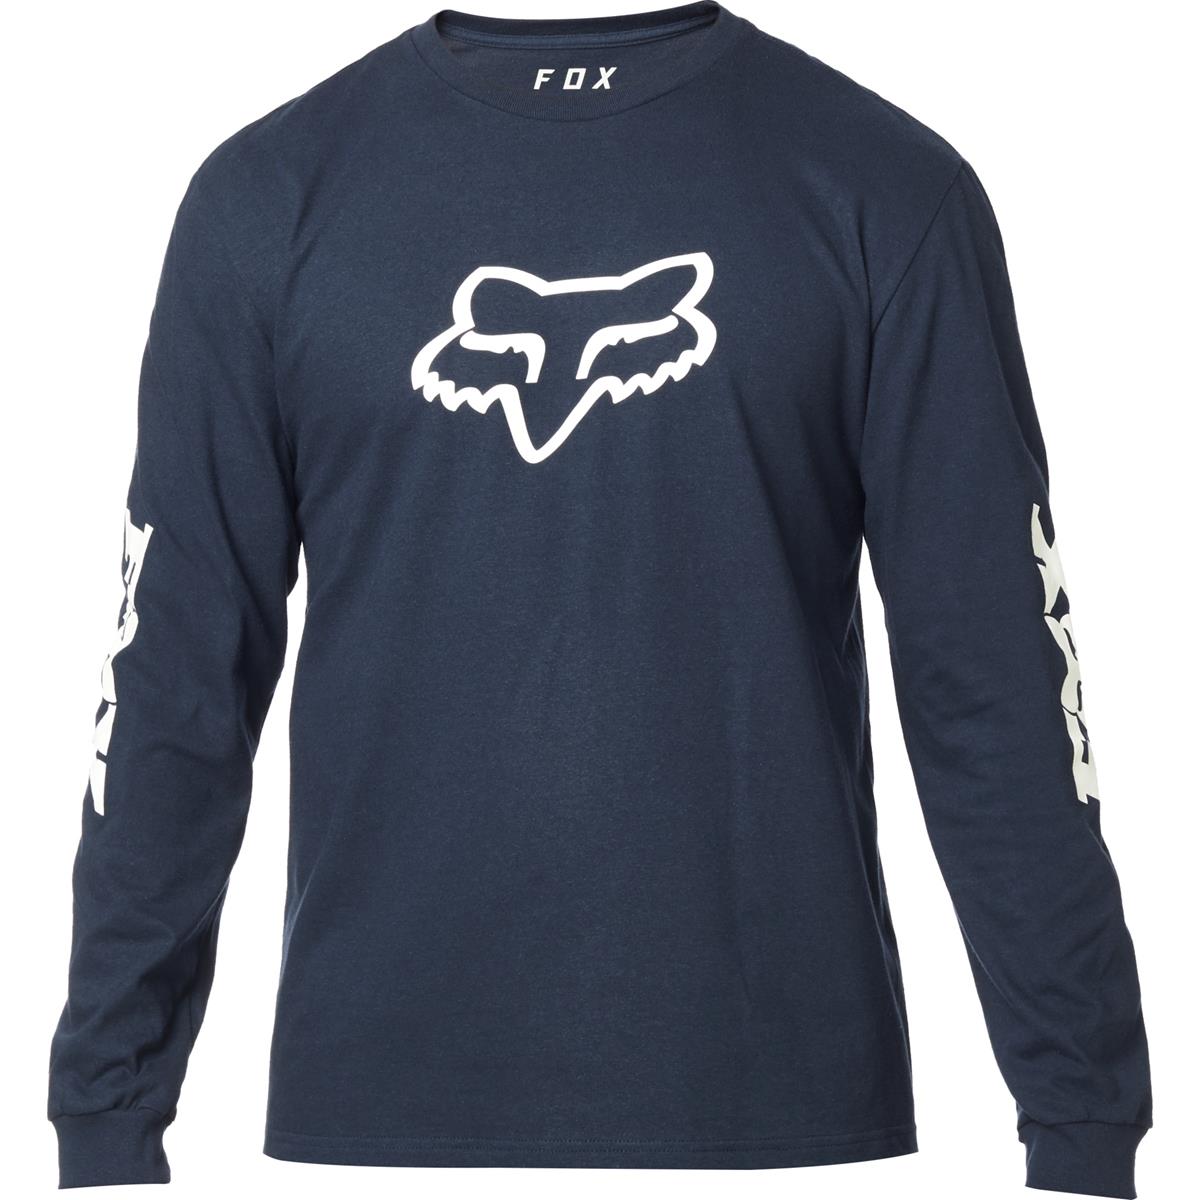 Fox T-Shirt Manches Longues Finisher Midnight